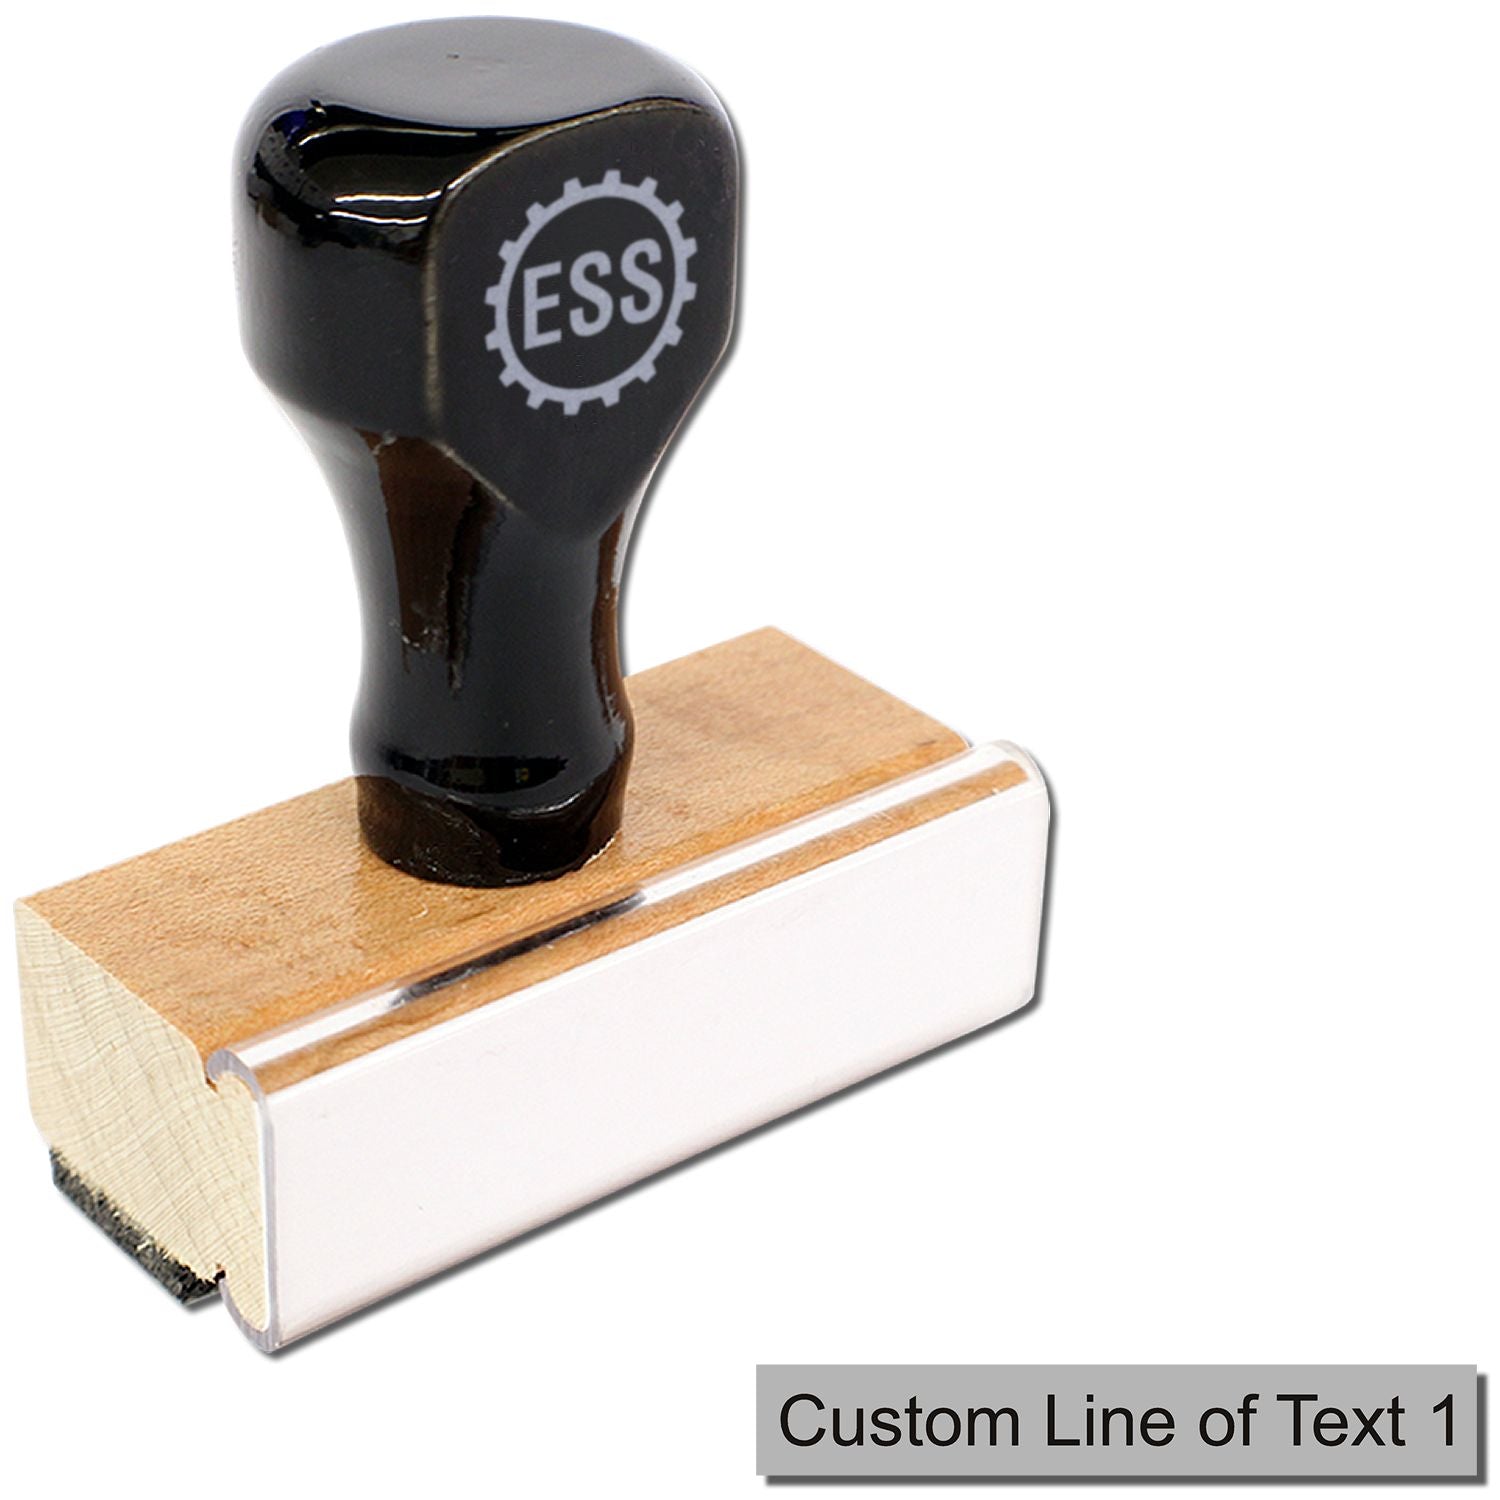 Promot Custom Stamp Up to 3 Lines of Personalized Text - Choose Font,  Color, Pad, Self-Inking Stamp for Return & Mailing Address, Office Stamps,  Ink